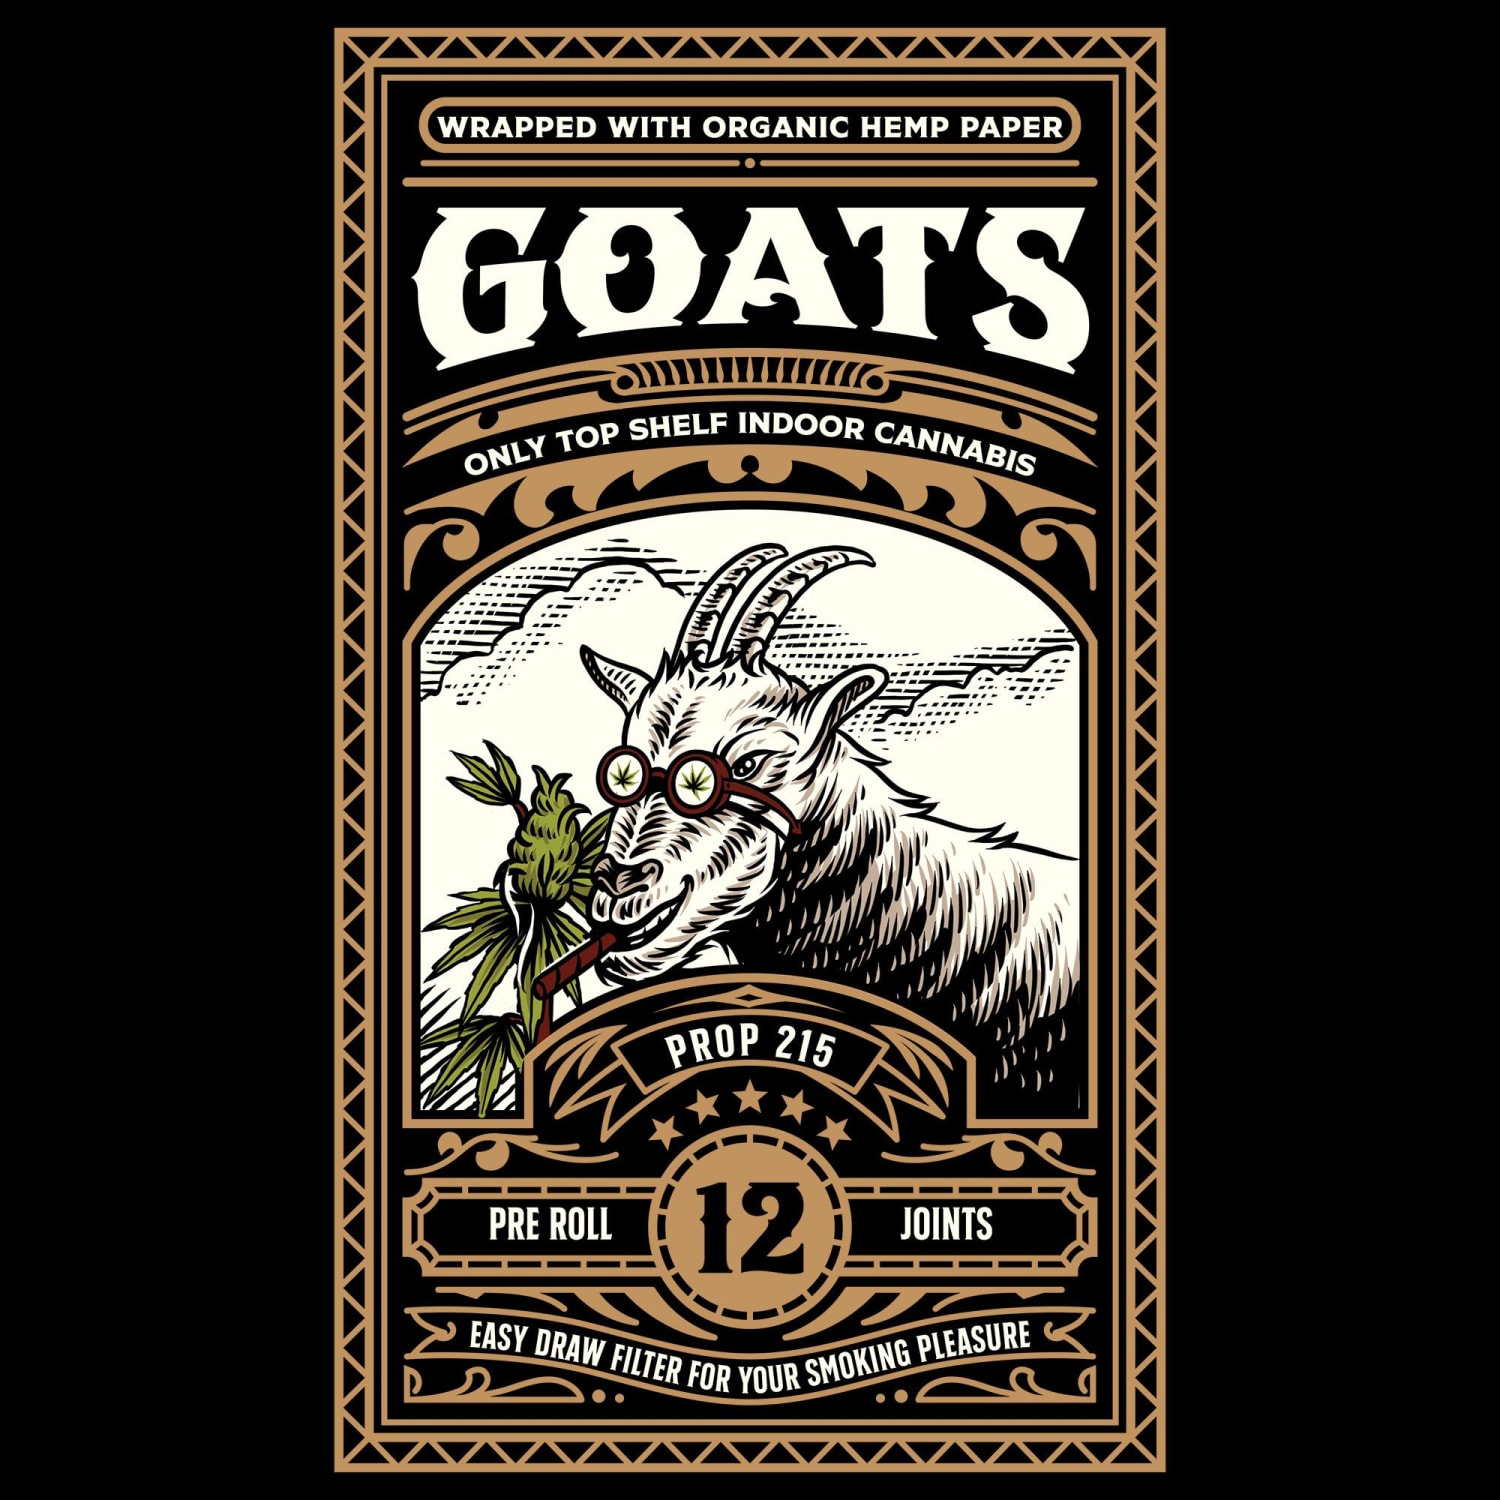 GOATS Packaging Project - Created w/ Musart Design - What Do You Think?